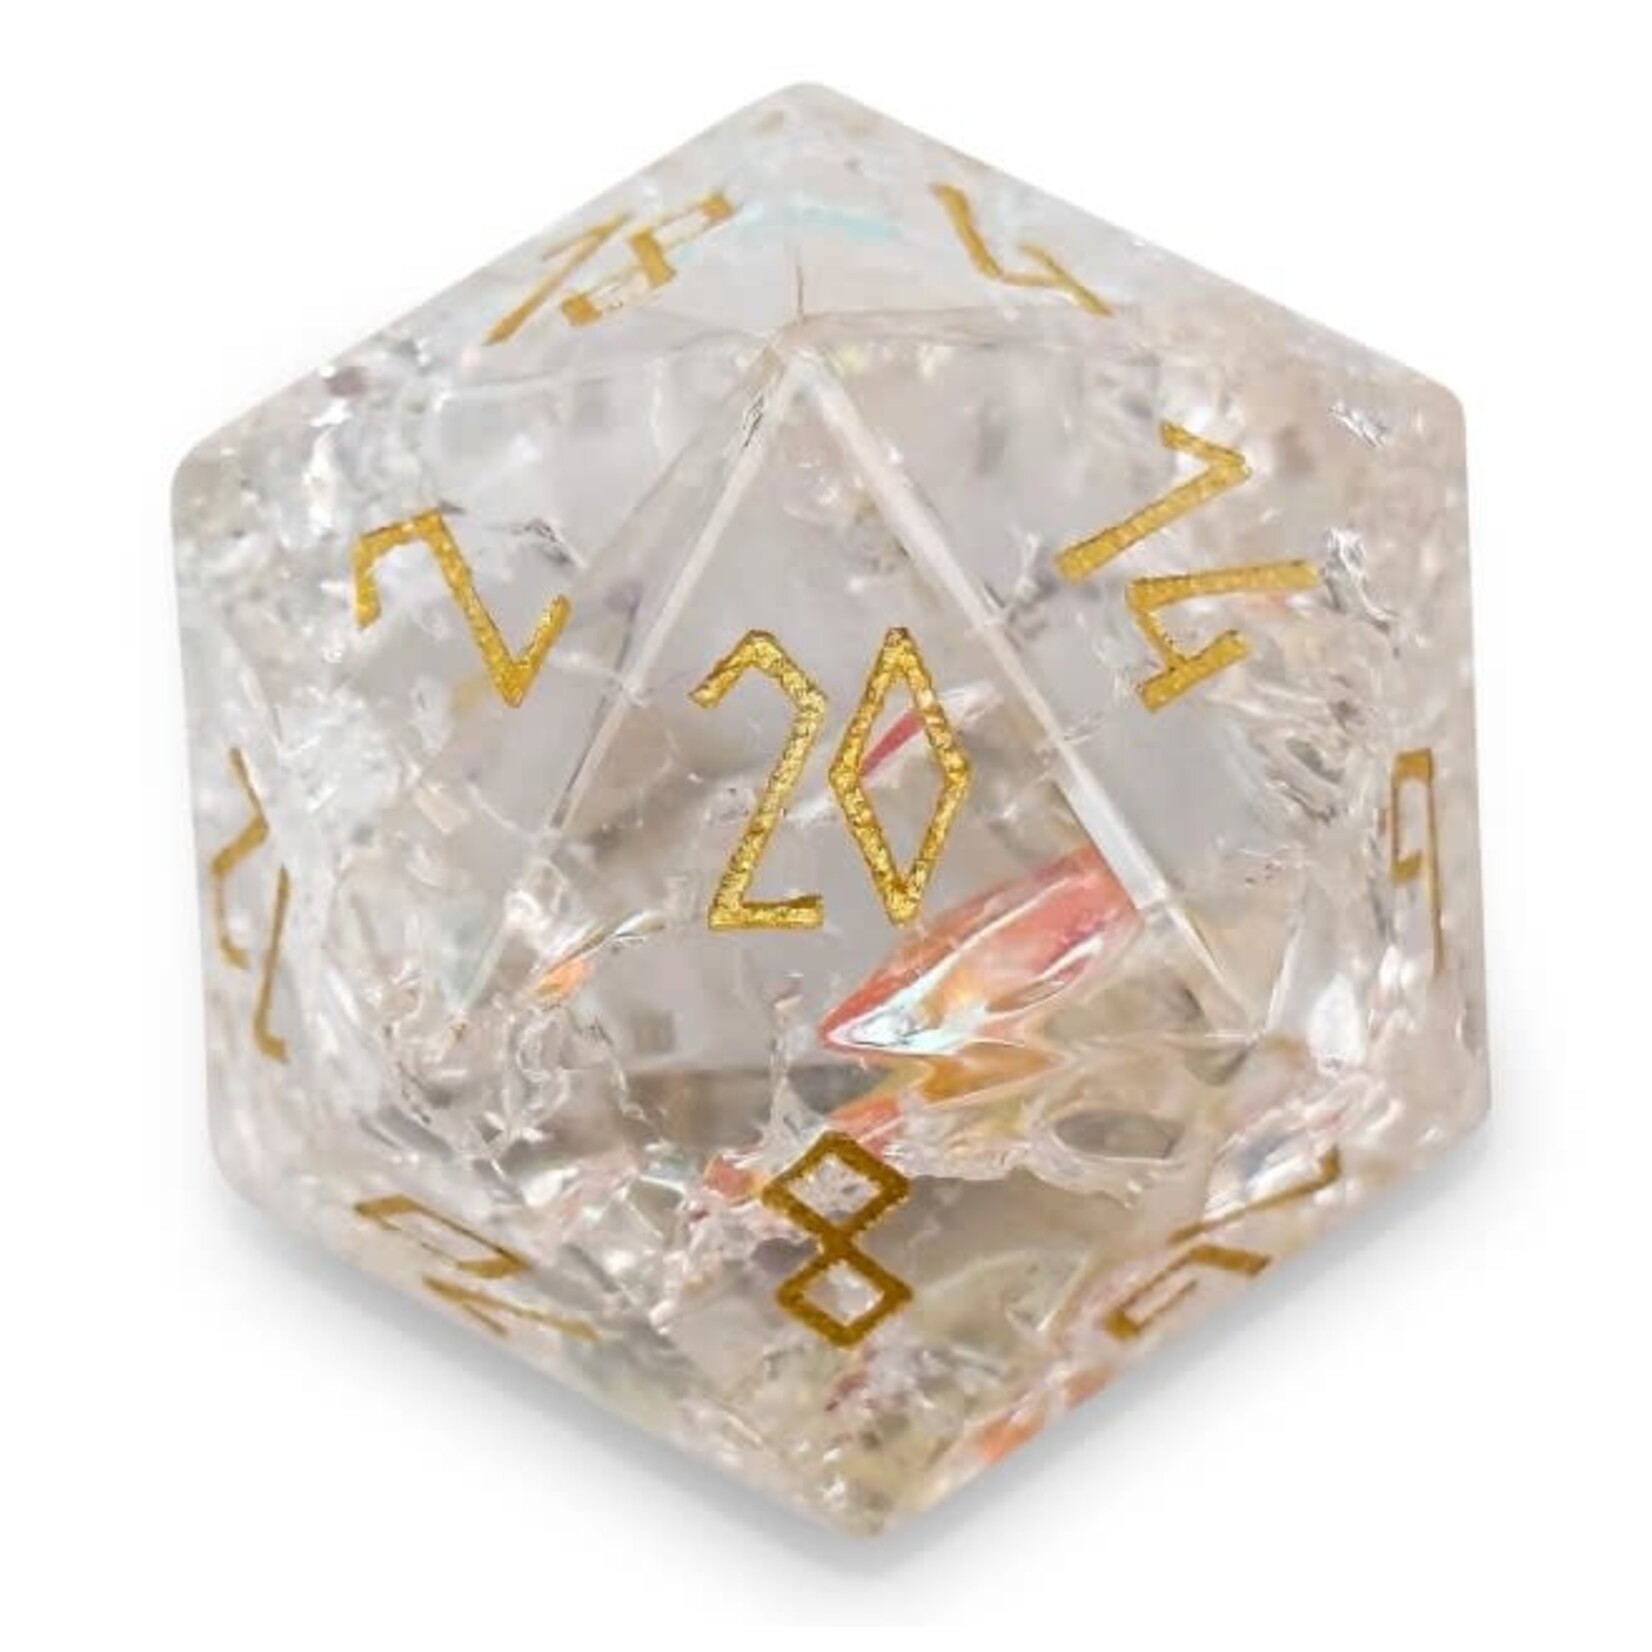 Norse Foundry Boulder 30mm Glass Dice - Shattered K9 Rainbow Glass with Gold Font